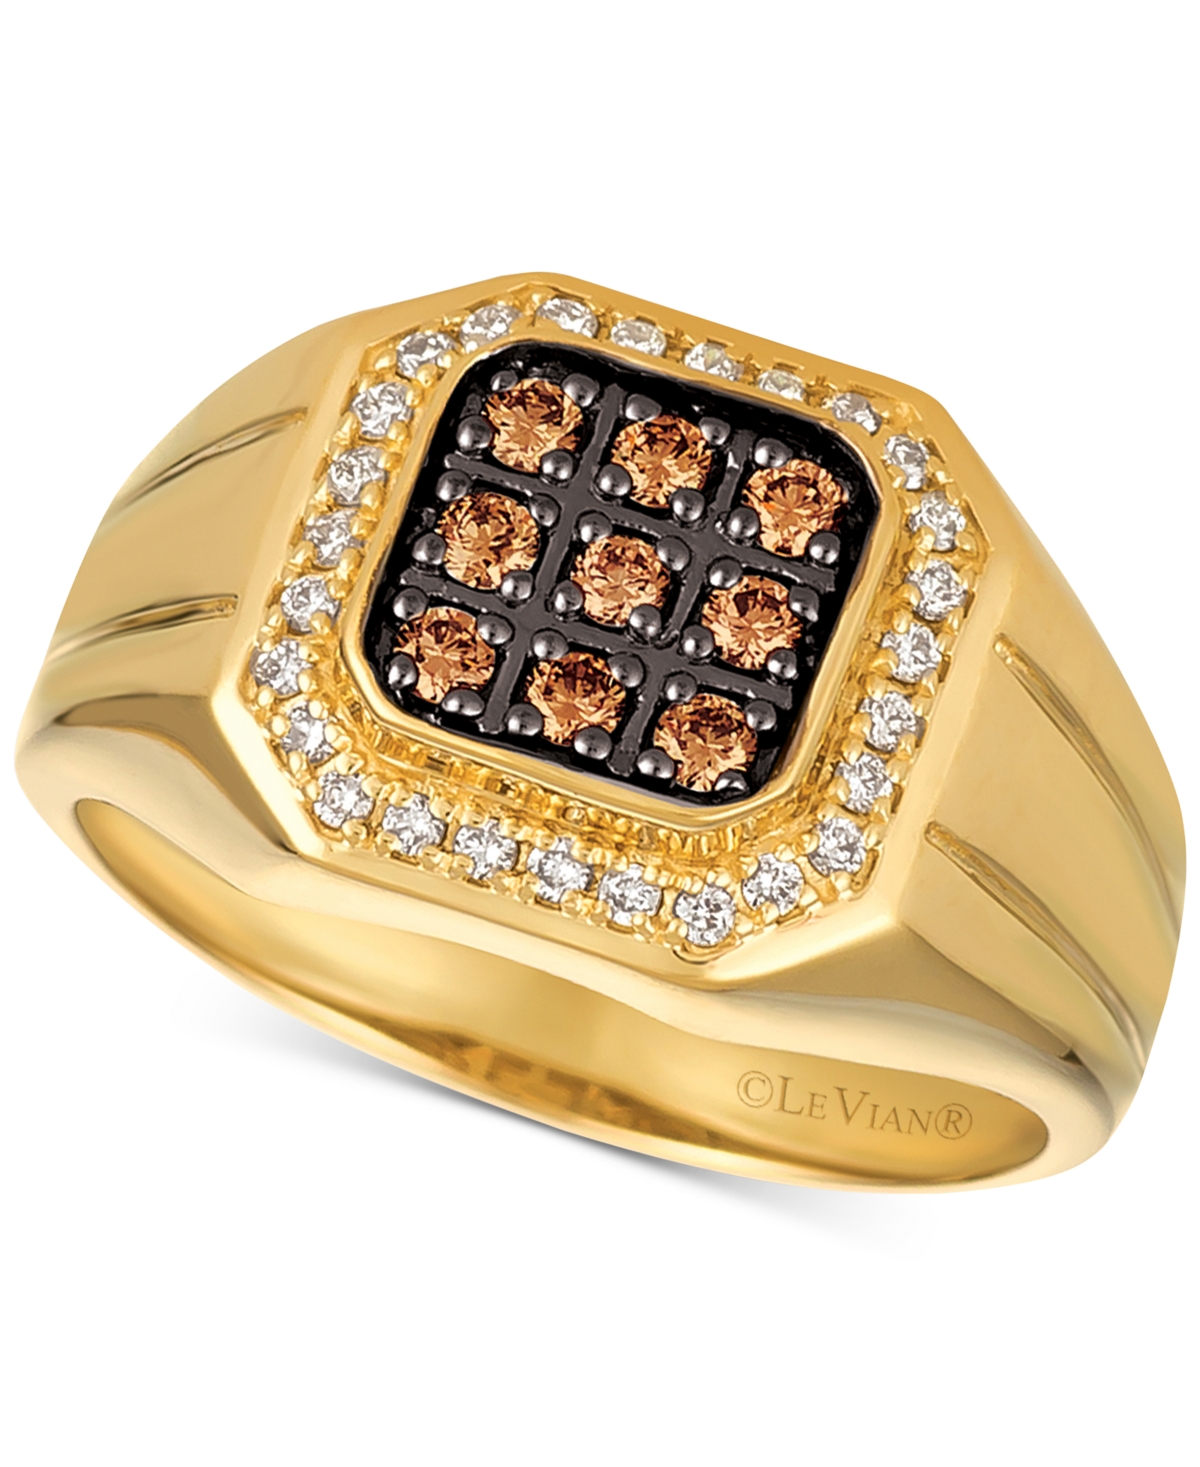 Gents Men's Diamond Ring (1/2 ct. t.w.) in 14k Gold - Yellow Gold